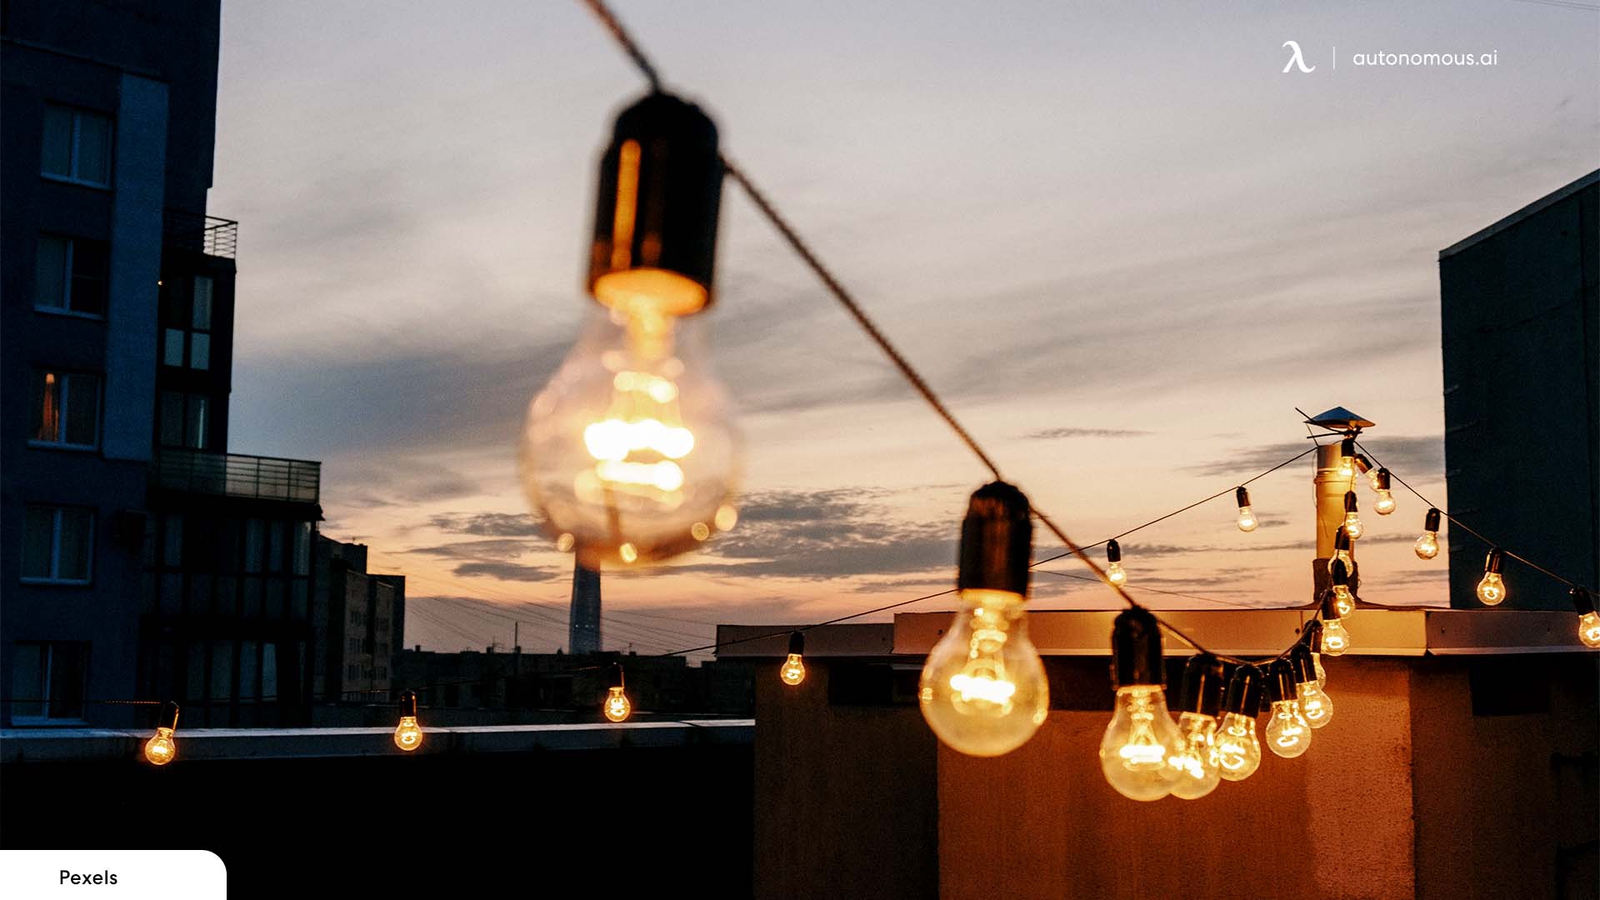 How do Rooftop Lighting Ideas Change The Rooftop Environment?